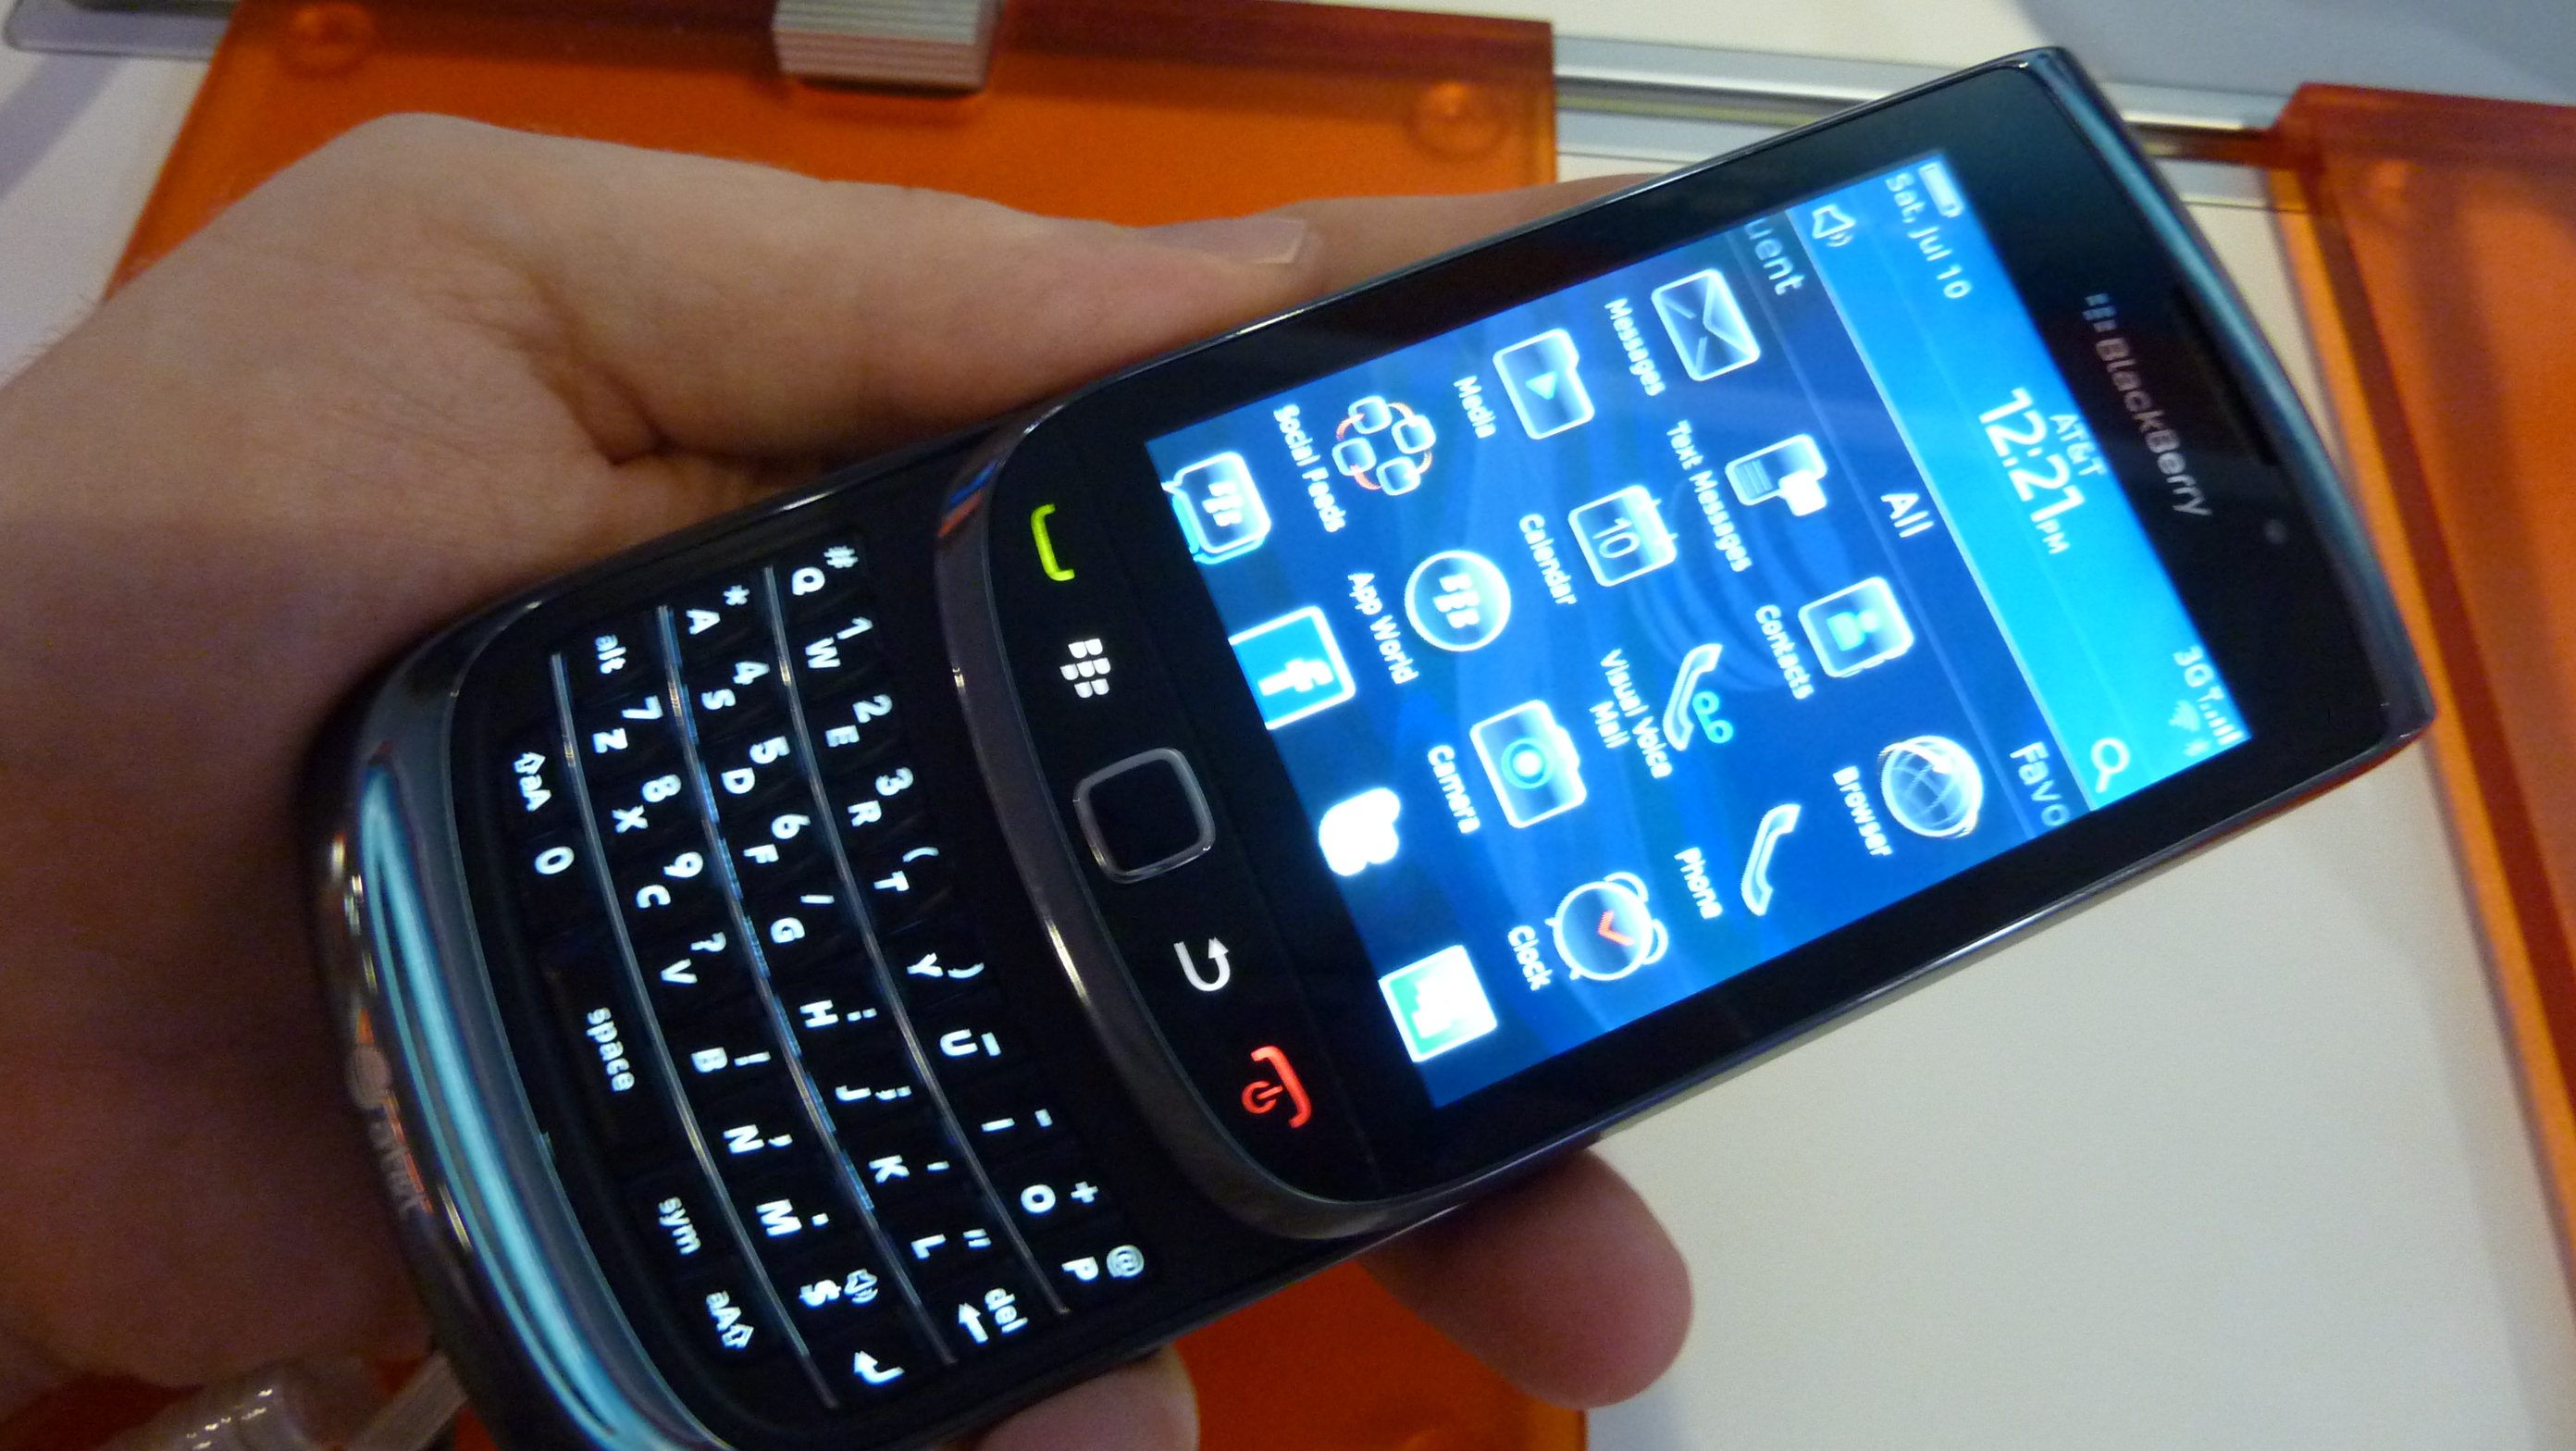 Blackberry Torch 9800 Review